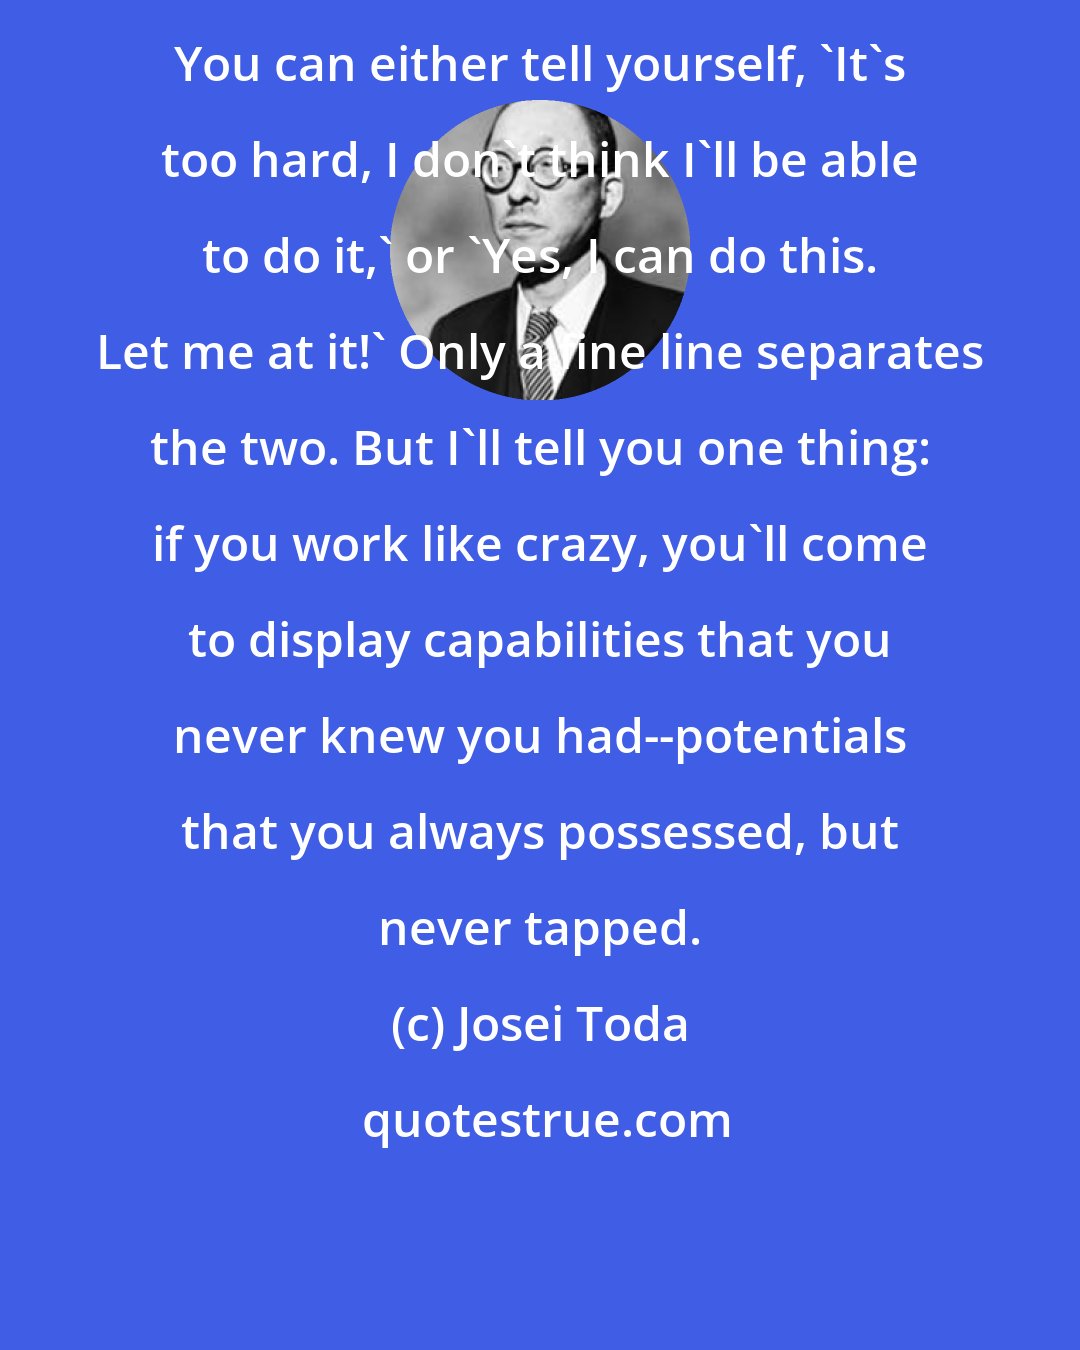 Josei Toda: You can either tell yourself, 'It's too hard, I don't think I'll be able to do it,' or 'Yes, I can do this. Let me at it!' Only a fine line separates the two. But I'll tell you one thing: if you work like crazy, you'll come to display capabilities that you never knew you had--potentials that you always possessed, but never tapped.